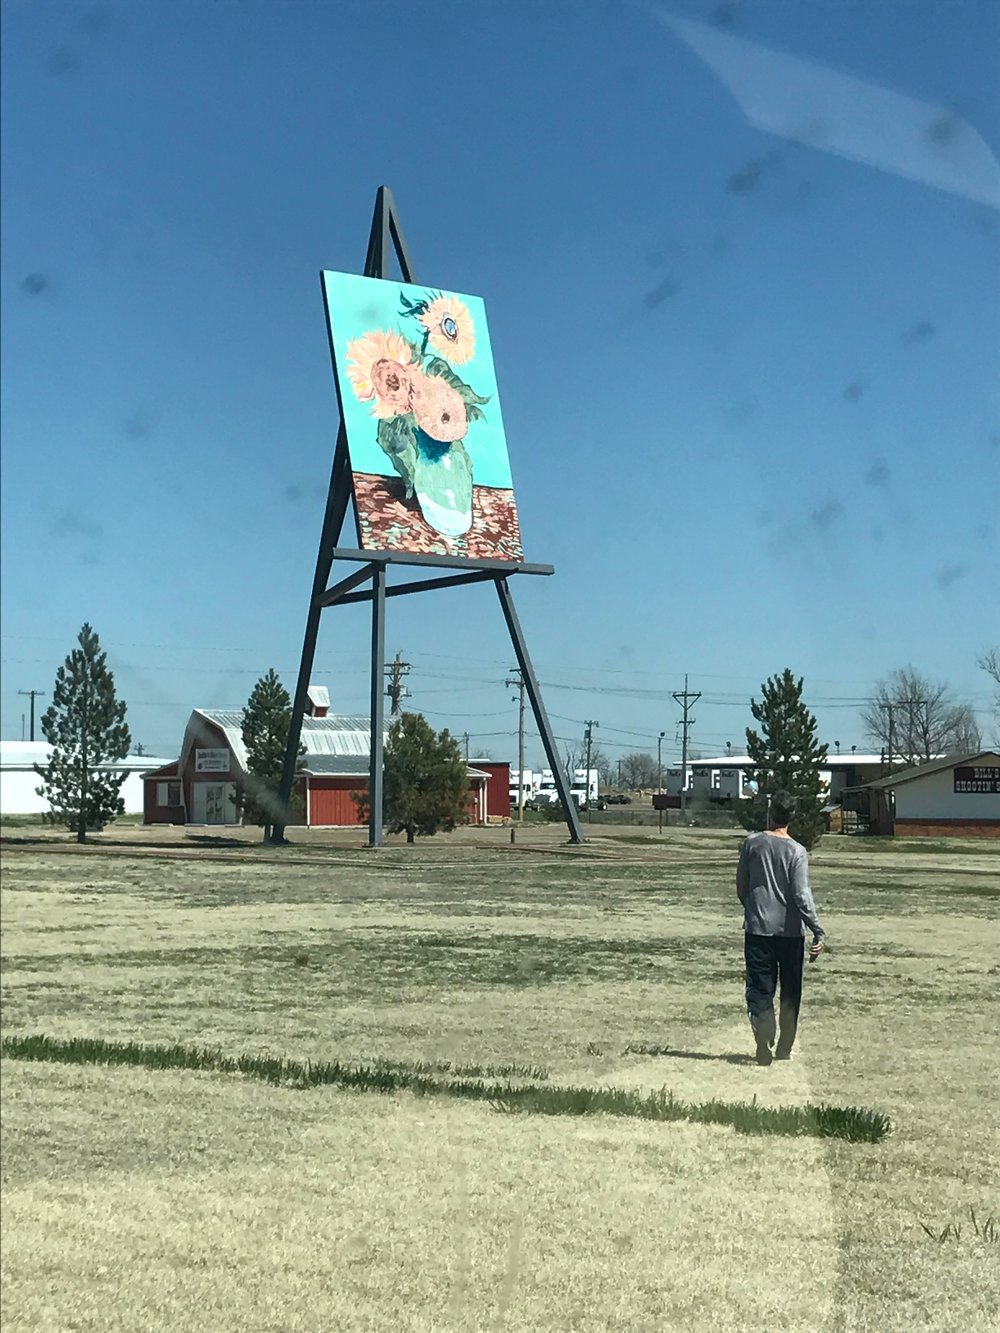   A quick stop to see the Worlds Largest Easel in Goodland, KS. Jay lends some perspective. That easel lived up to its title.  